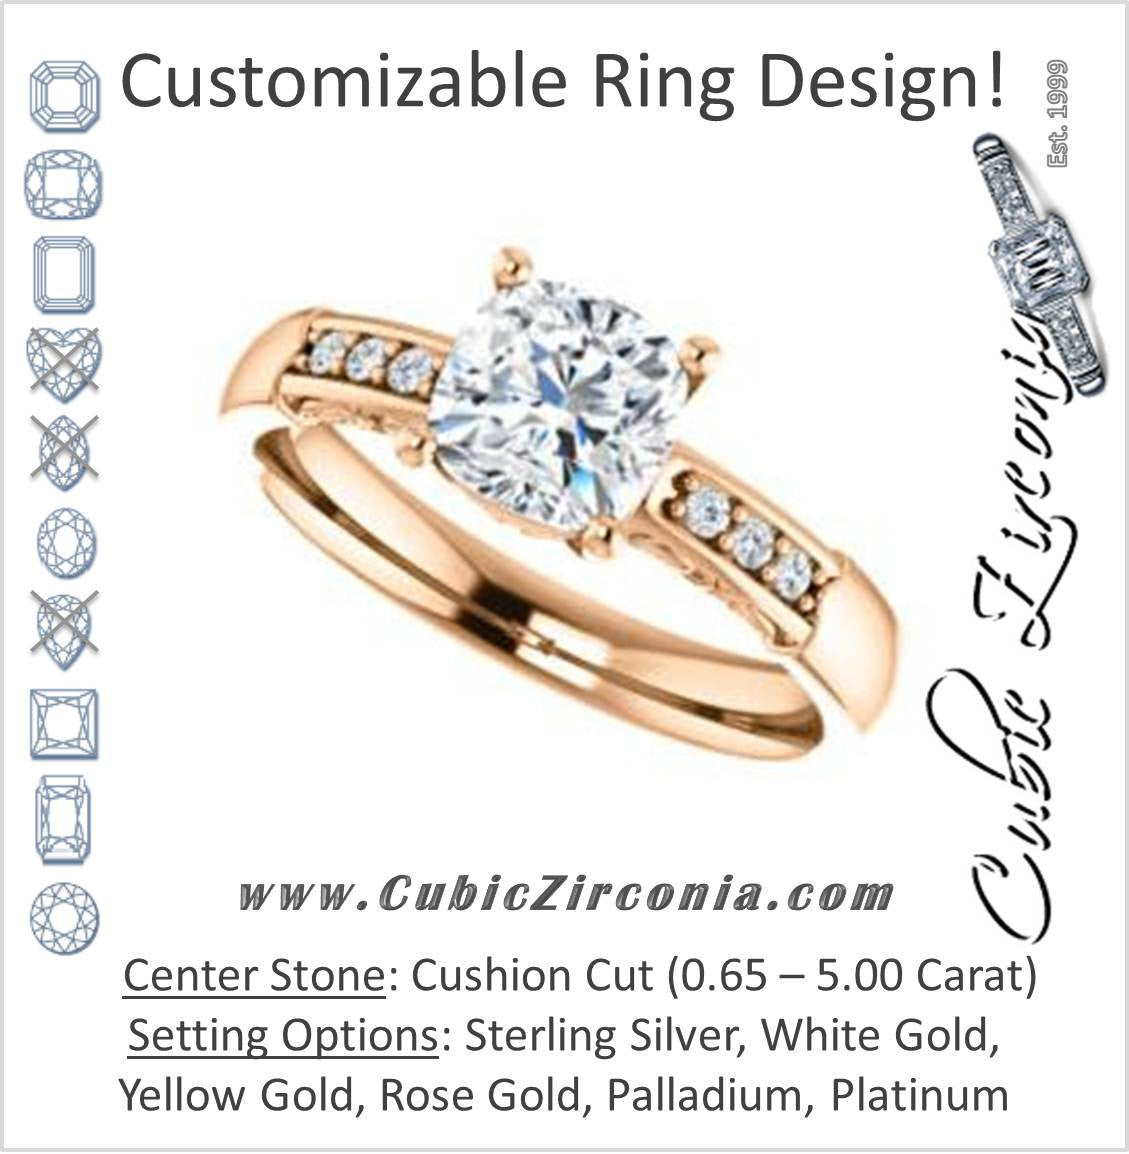 Cubic Zirconia Engagement Ring- The Migdala (Customizable 7-stone Cushion Cut Design with Round Channel Accents & Decorative Filigree)